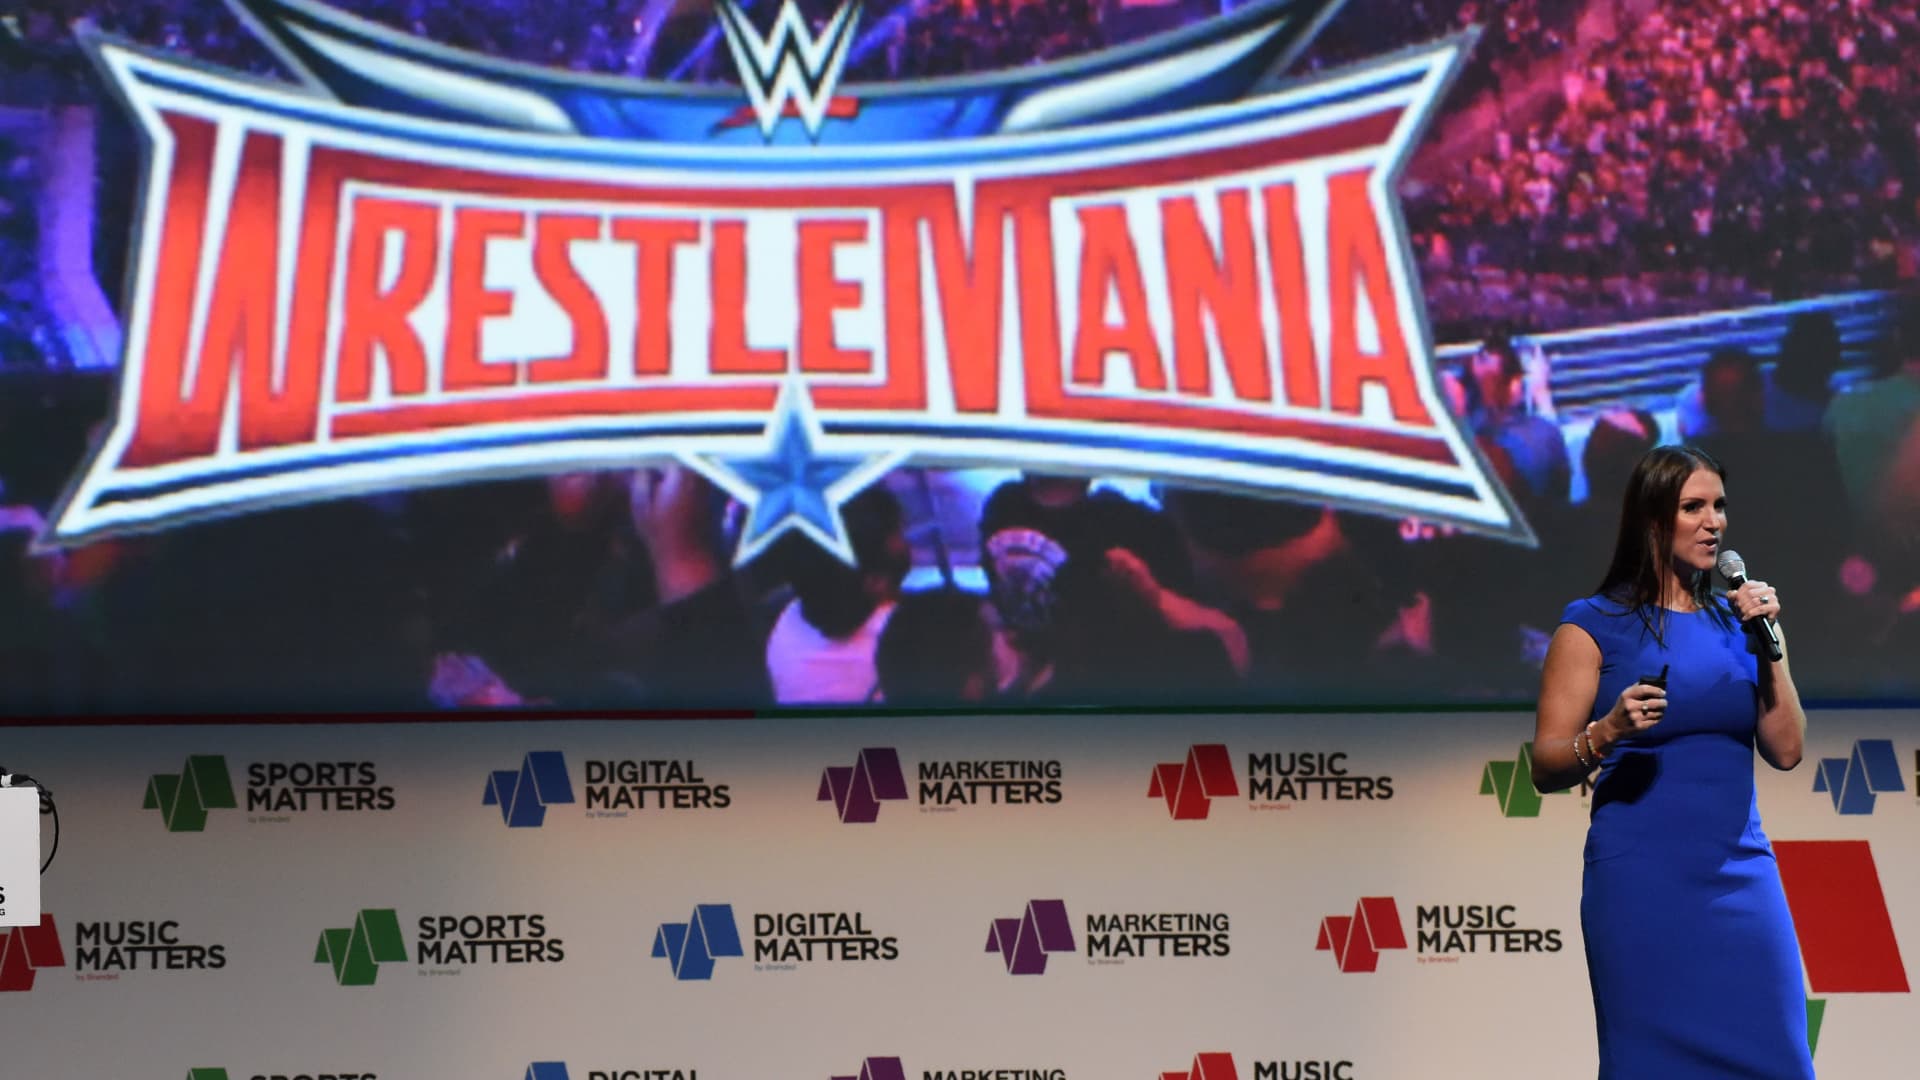 WWE looks set to increase sponsorship revenue as live events return, media deal expires